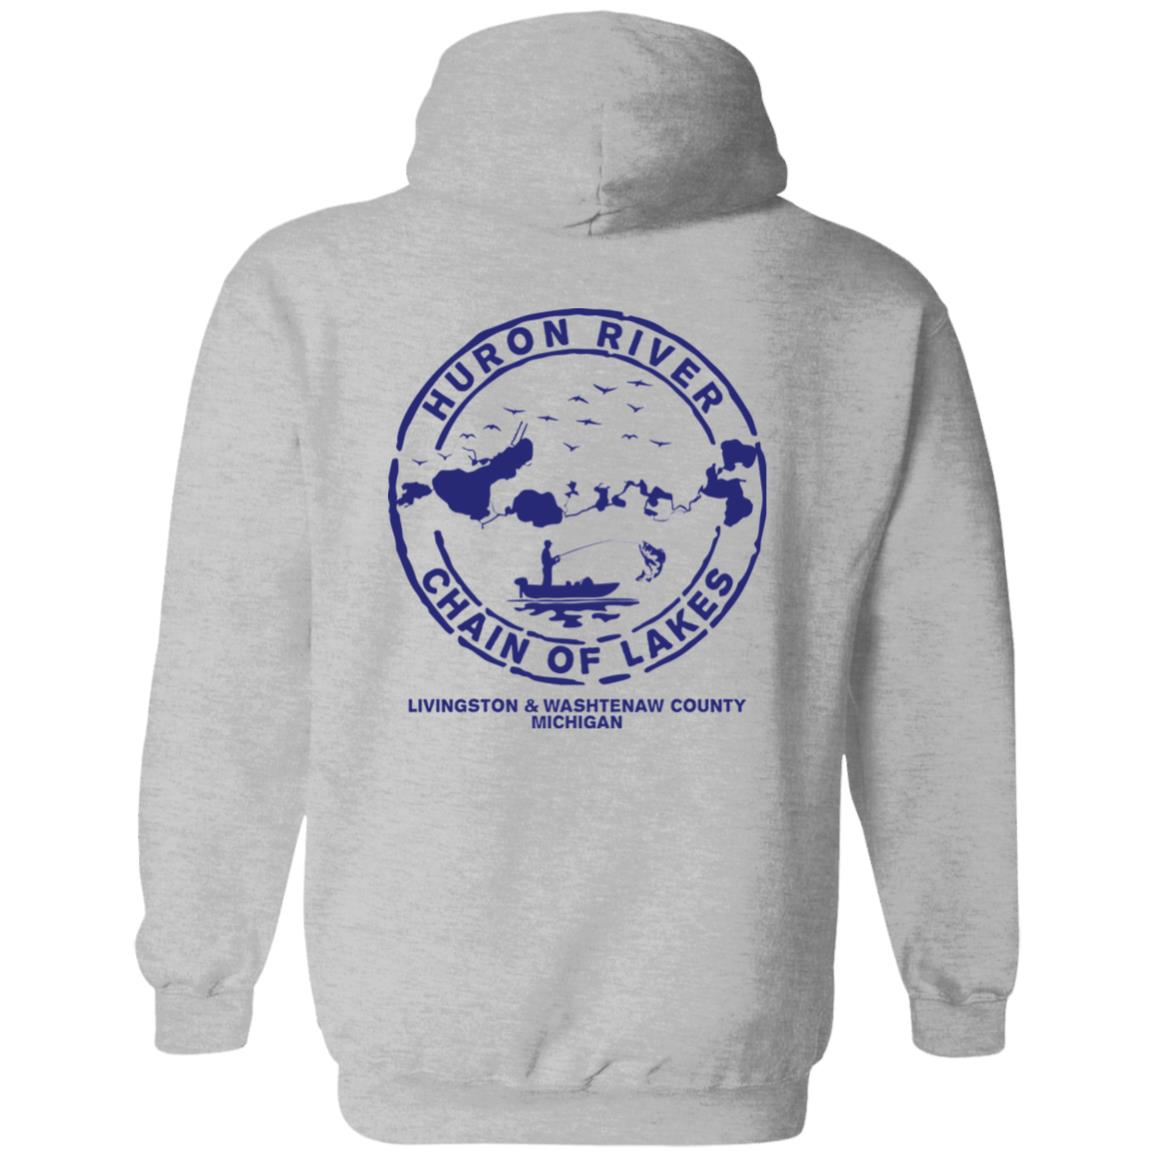 ***2 SIDED***  HRCL FL - Navy Boats N Hoes - 2 Sided G185 Pullover Hoodie